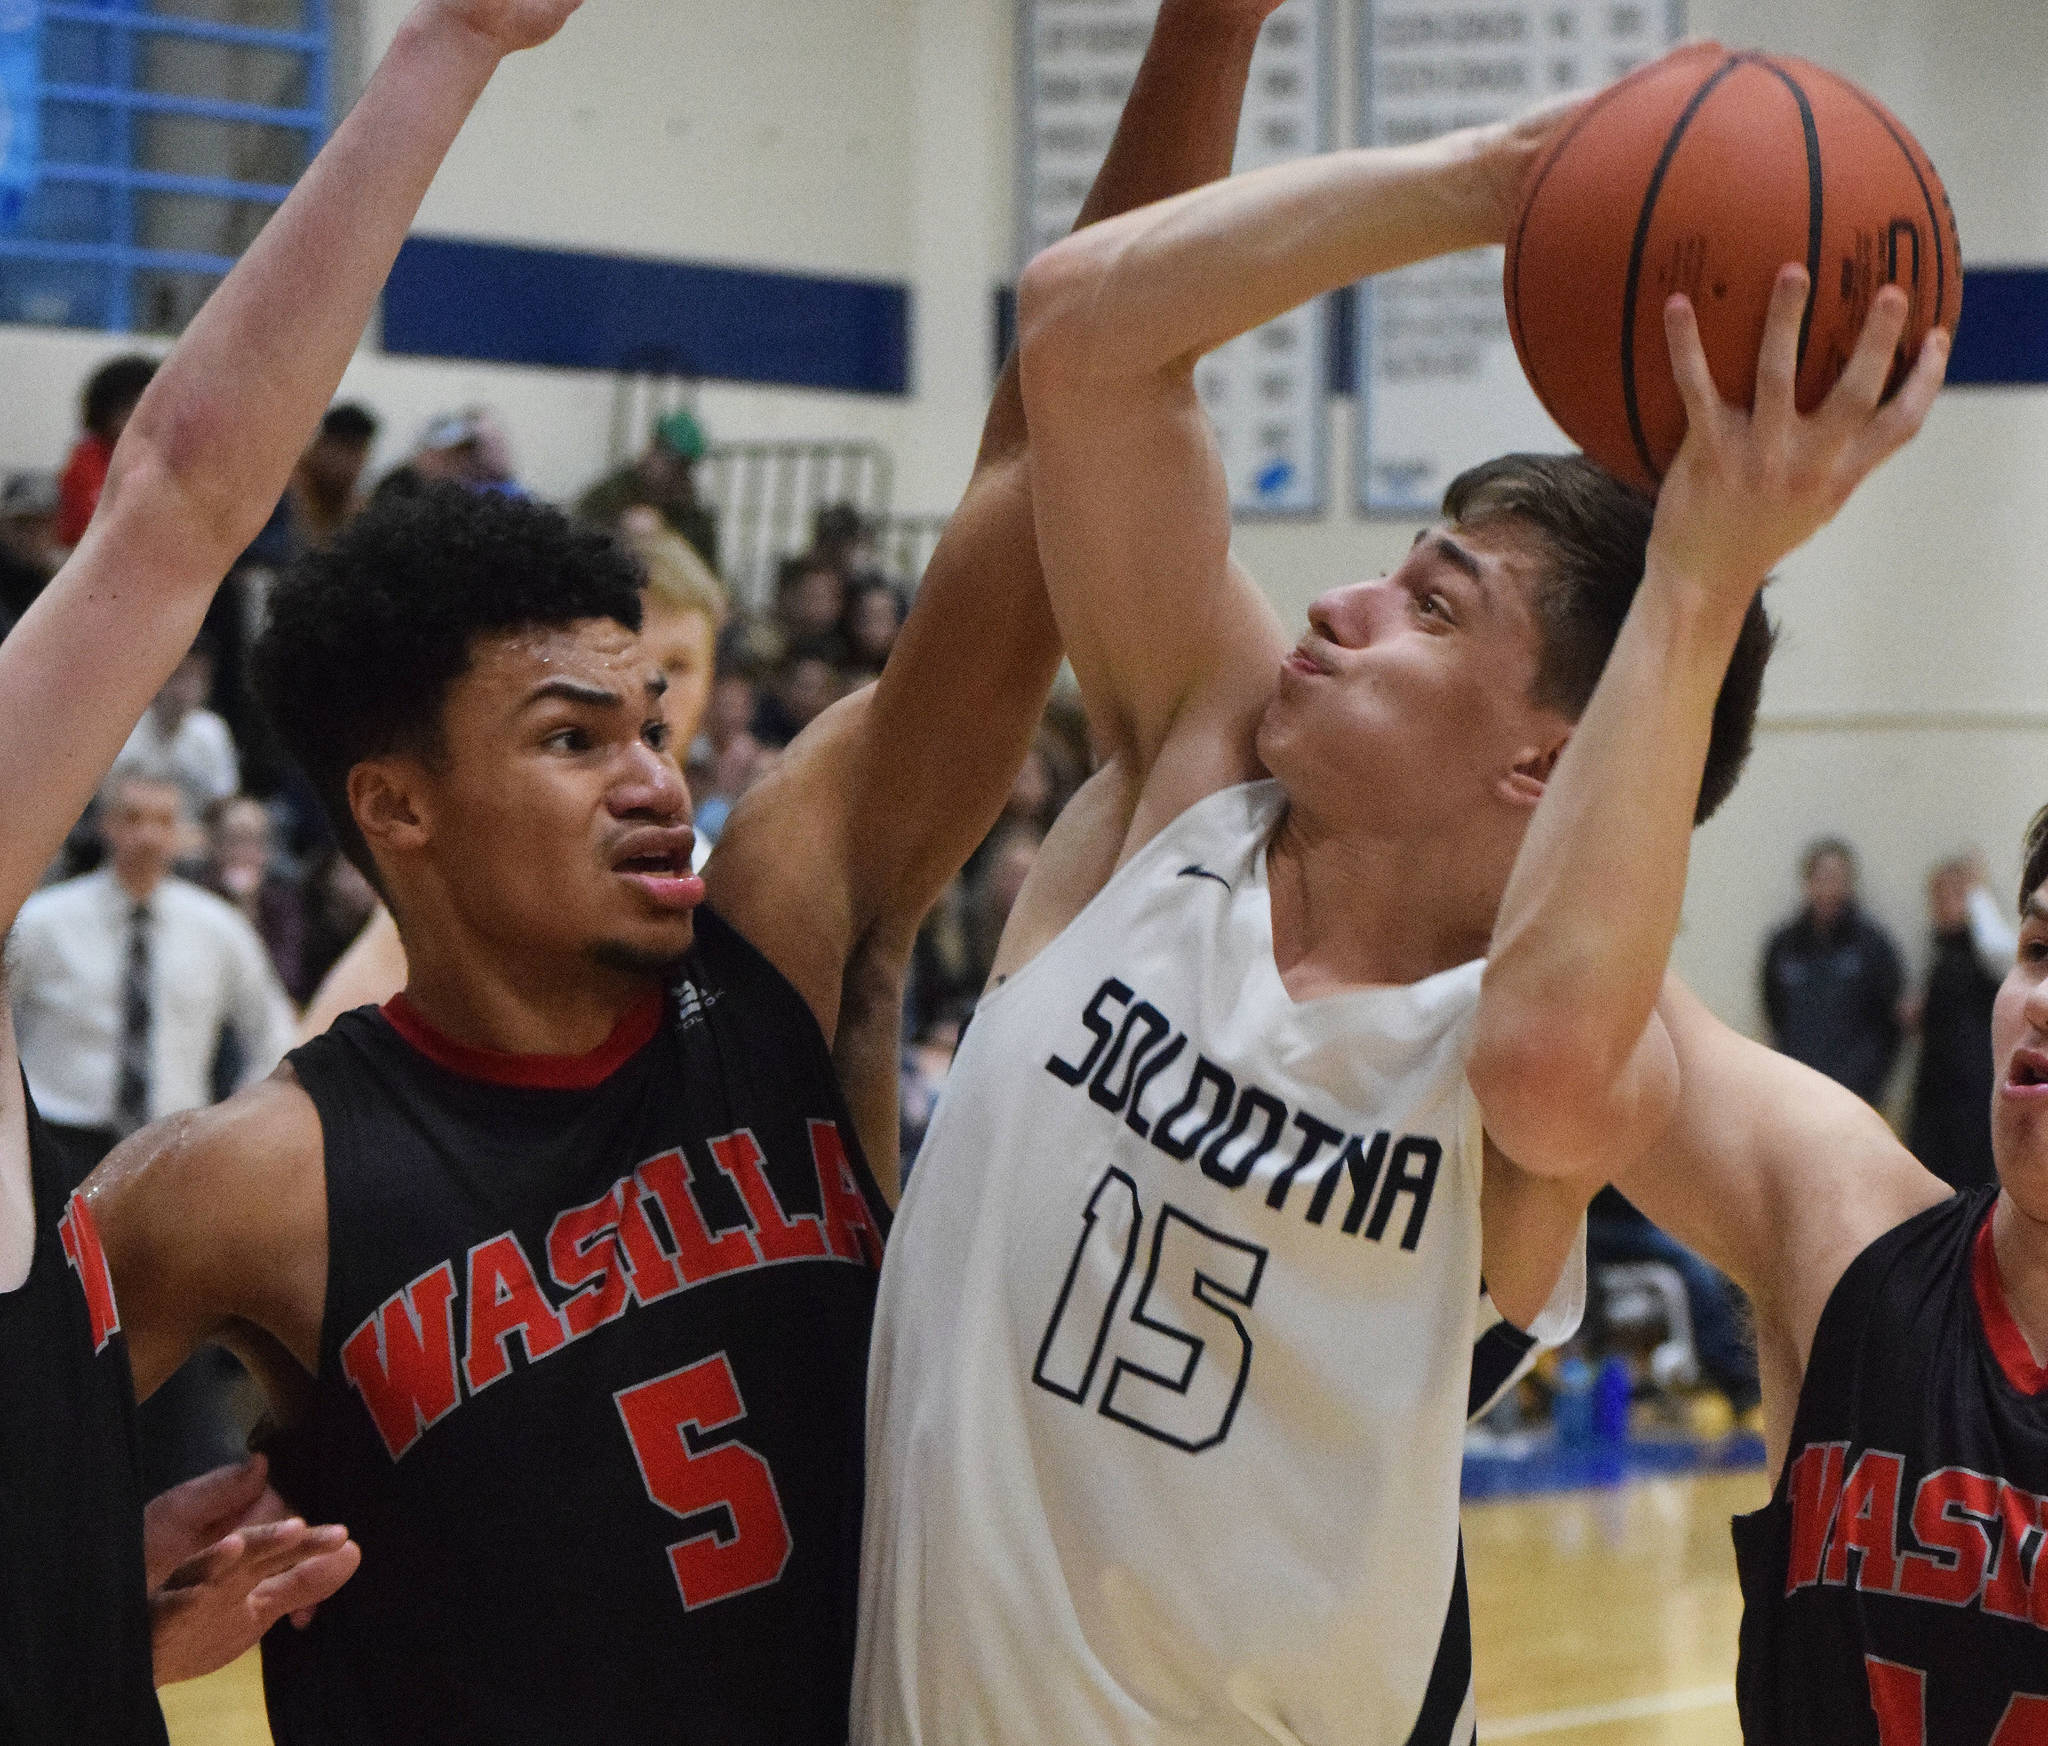 Soldotna’s Jersey Truesdell (15) attempts a shot against Wasilla’s Daniel Headdings Friday night in a conference meeting at Soldotna High School. (Photo by Joey Klecka/Peninsula Clarion)